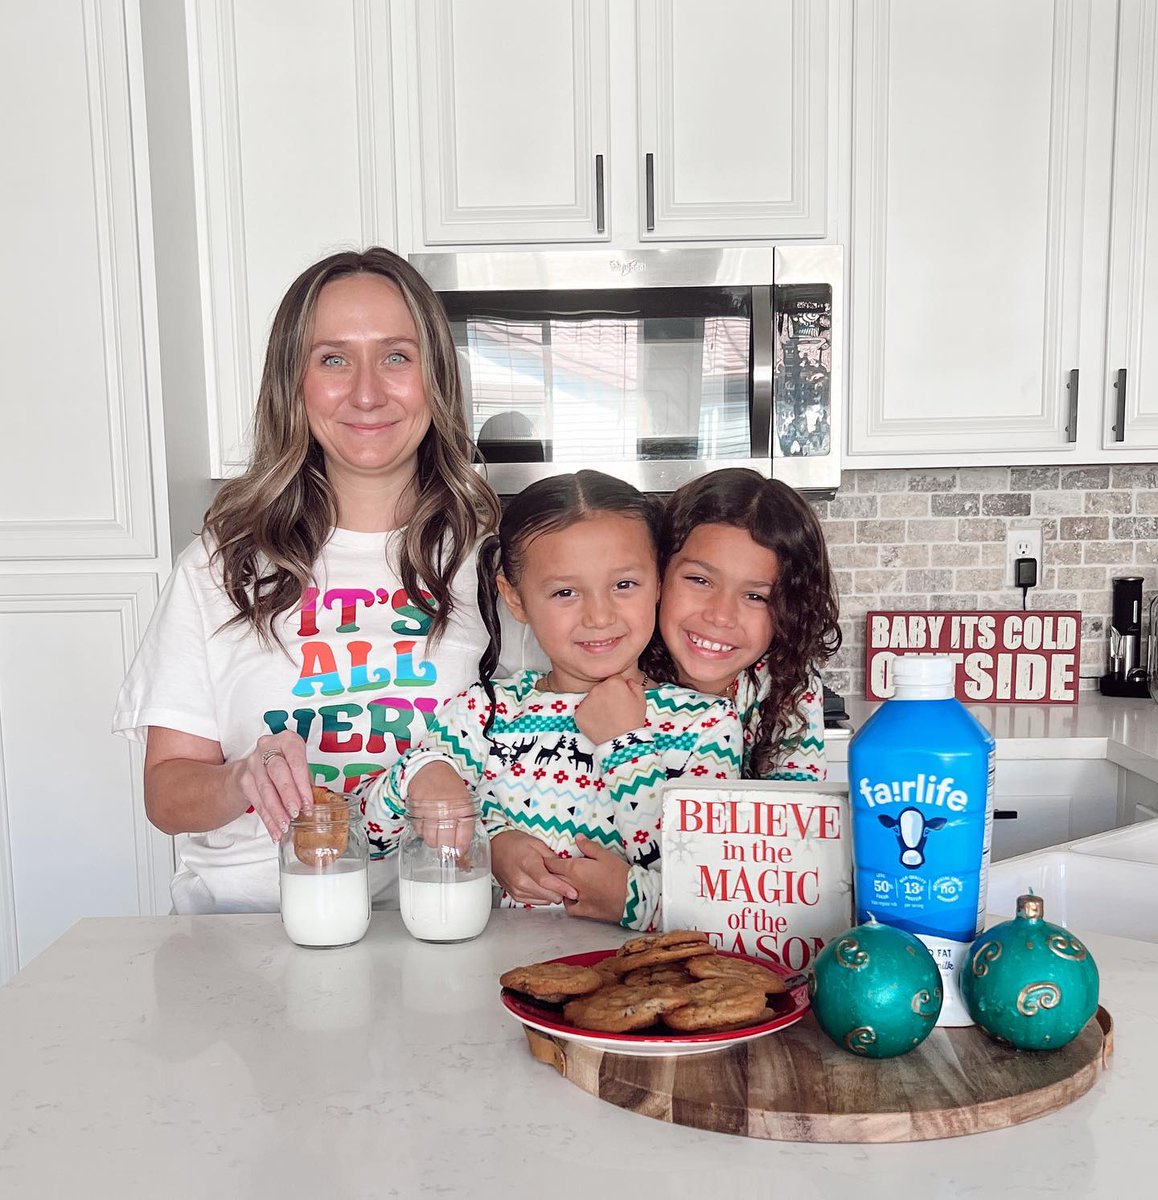 📷 by aly.andco on IG: The girls have been perfecting their baking skills for Santa and enjoying our cookies with @fairlife ultra-filtered milk. #ad It’s creamy and made with 50% more protein and 50% less sugar than regular milk, making it the perfect pairing for milk & cookies!